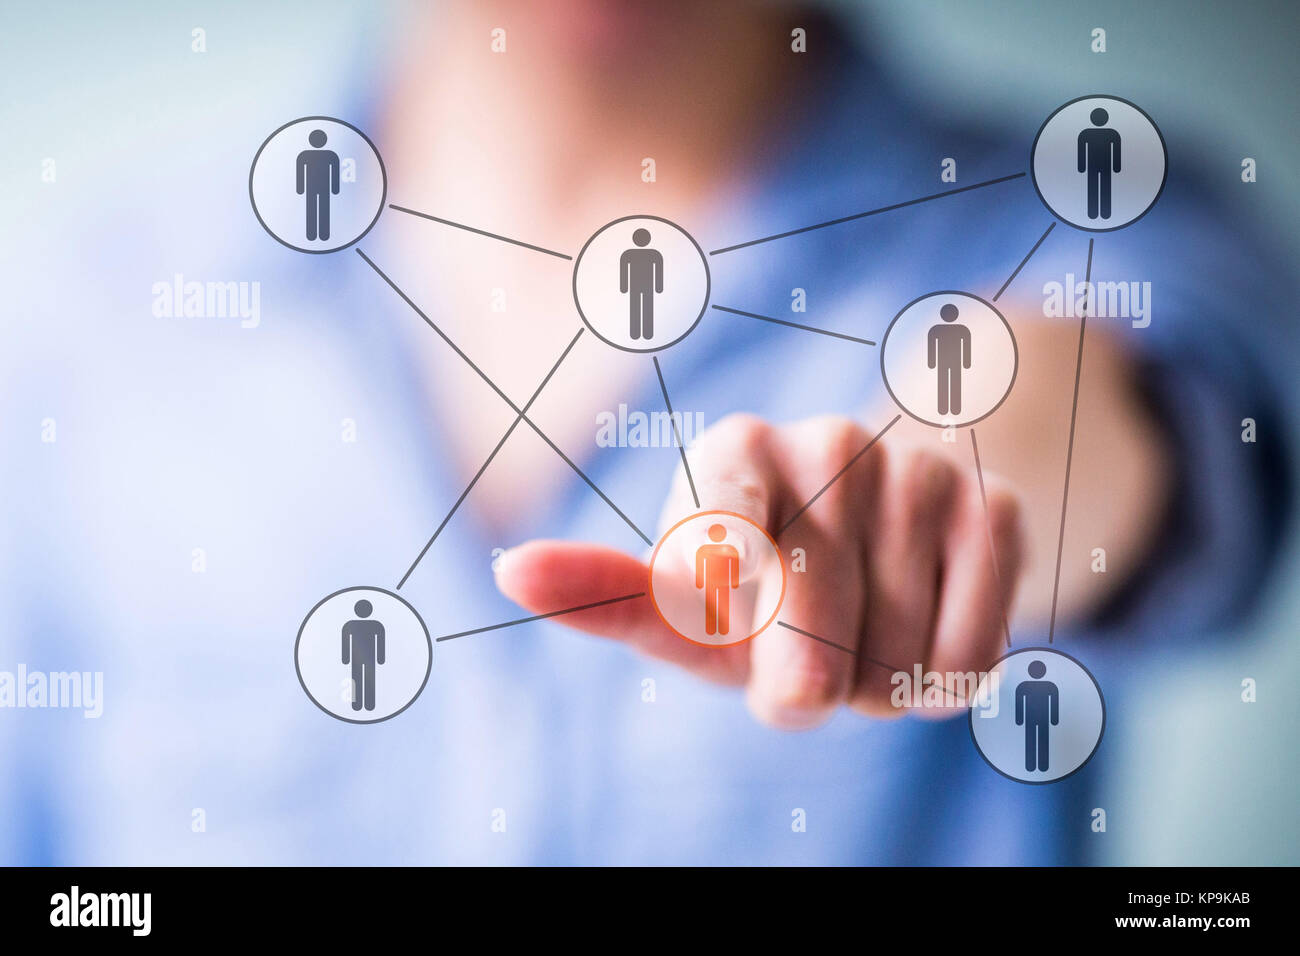 Conceptual image of network. Stock Photo